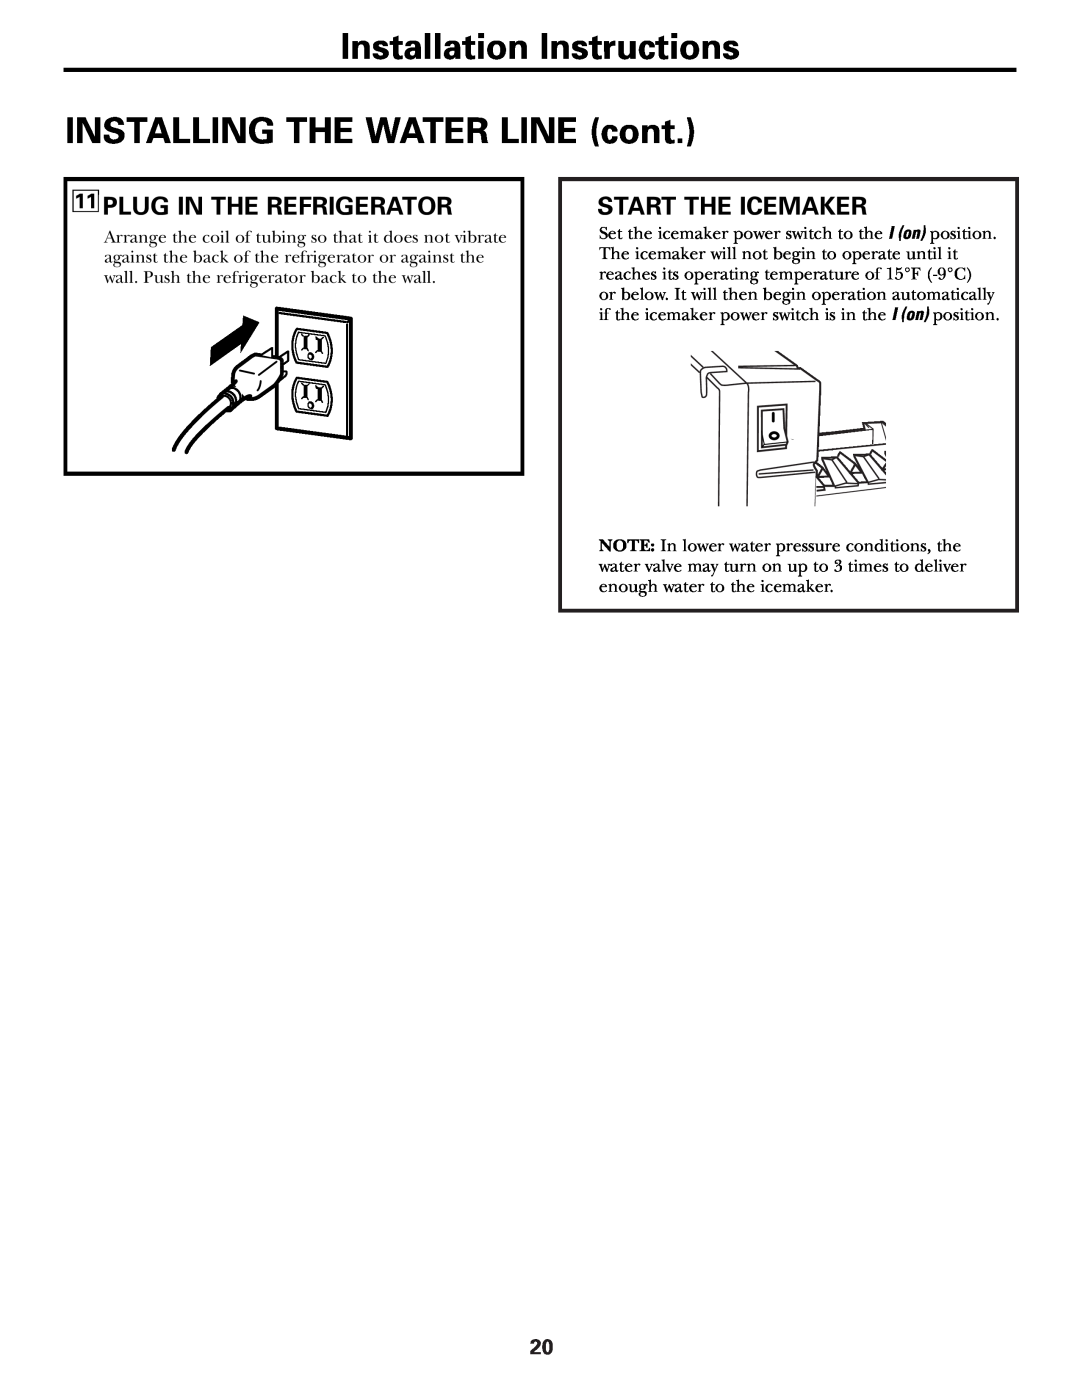 GE 197D3351P003 Plug In The Refrigerator, Start The Icemaker, Installation Instructions INSTALLING THE WATER LINE cont 